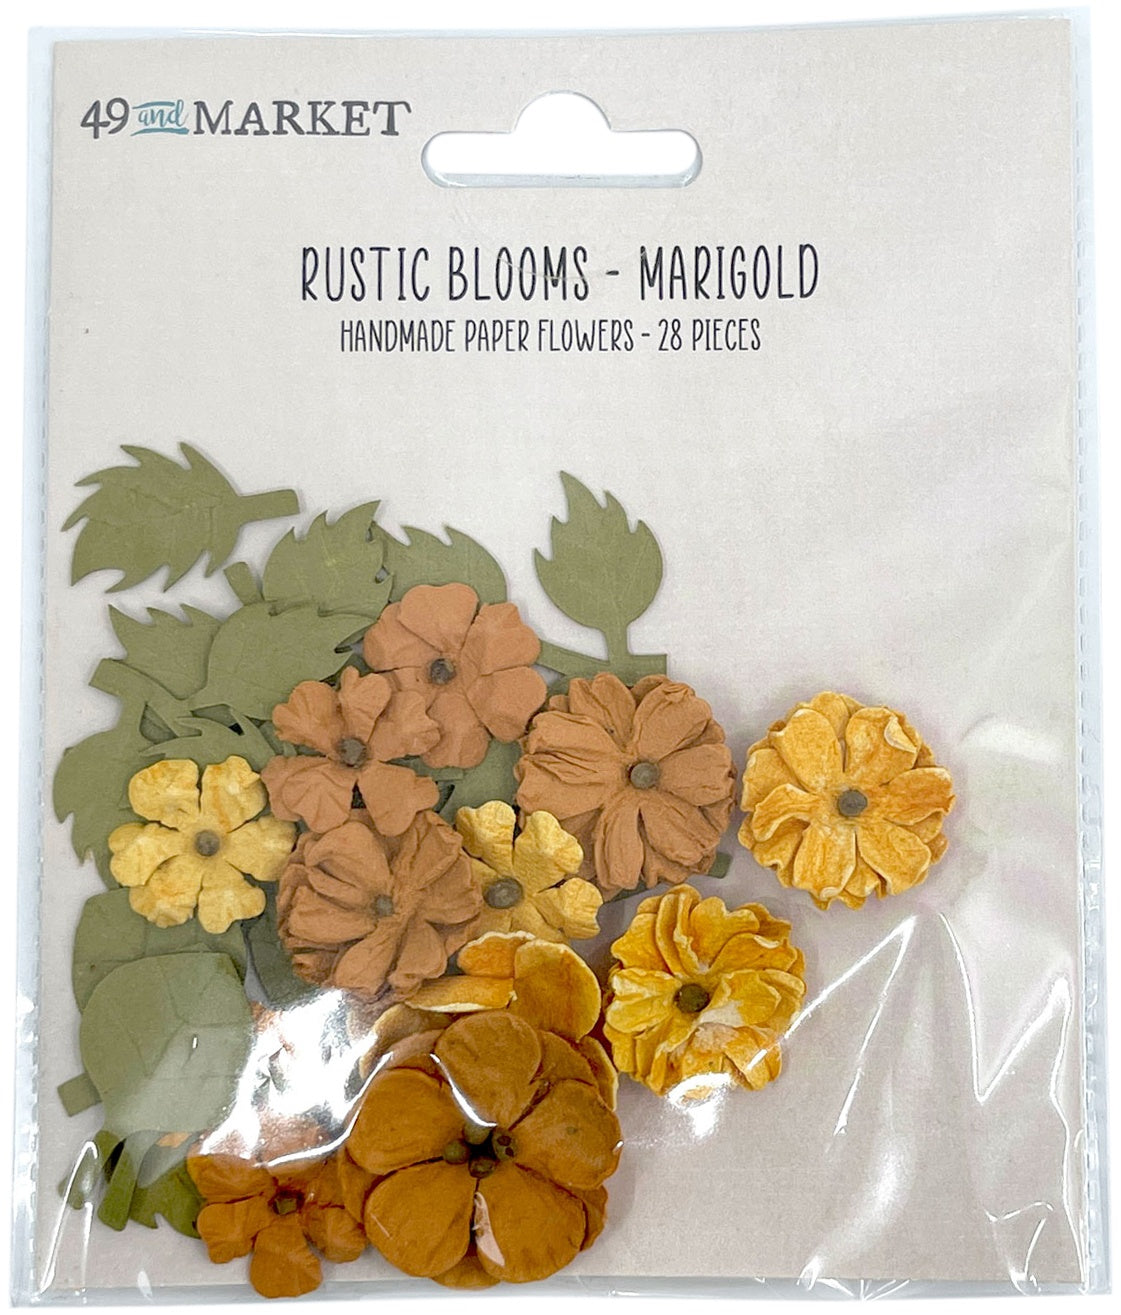 49 and Market - Rustic Blooms - Marigold